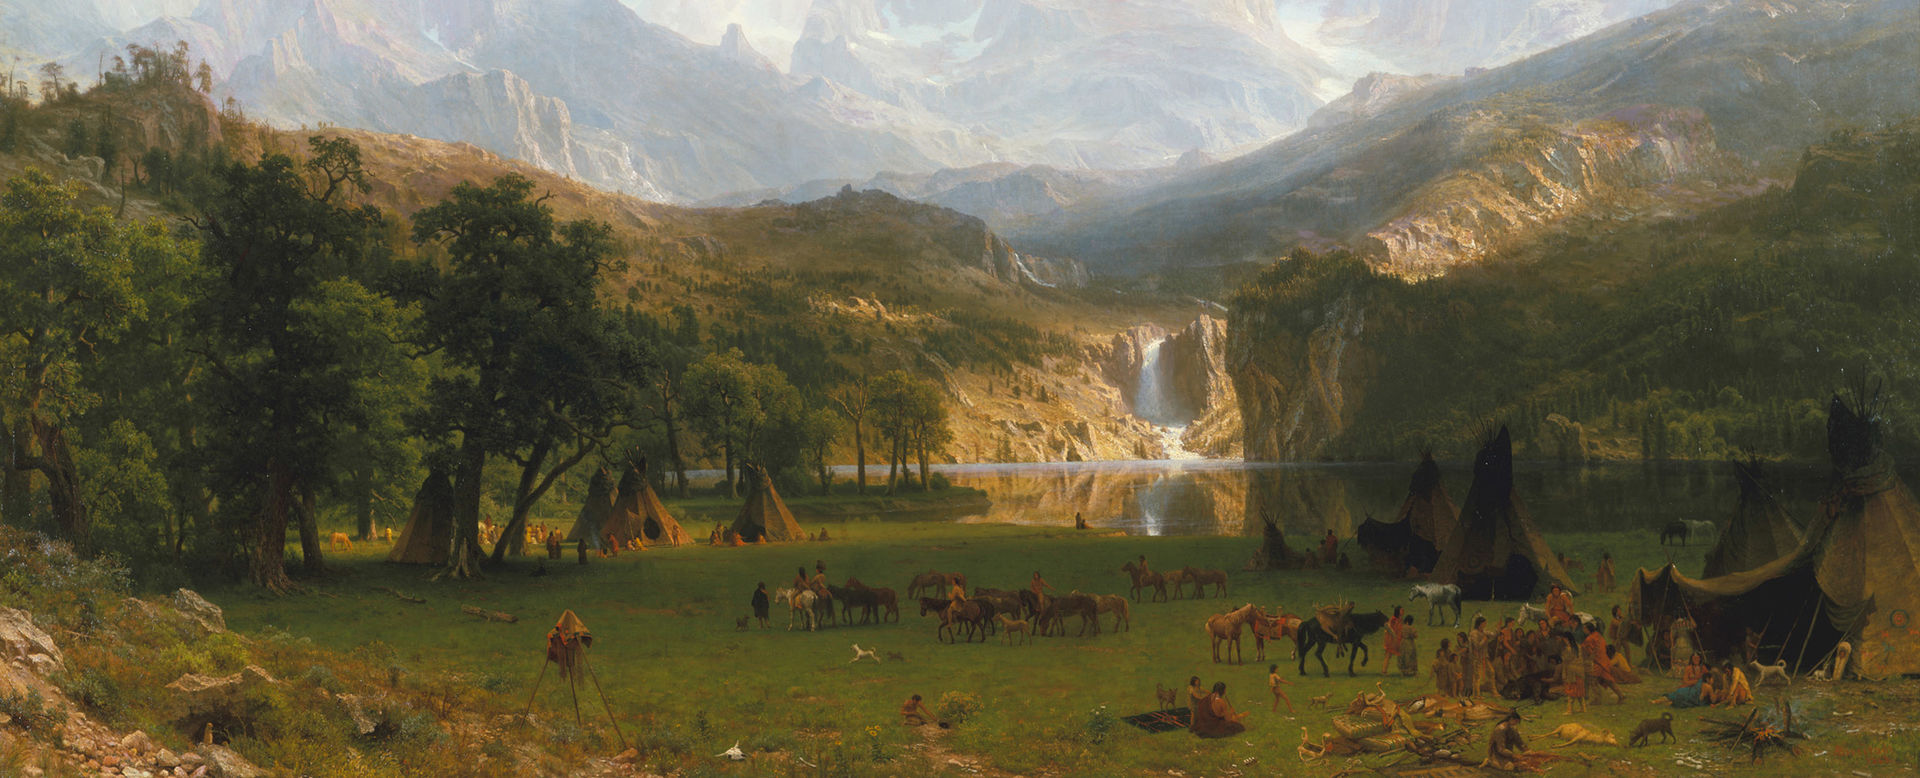 A painting of a landscape with mountains and a waterfall, and Native Americans camped in the foreground